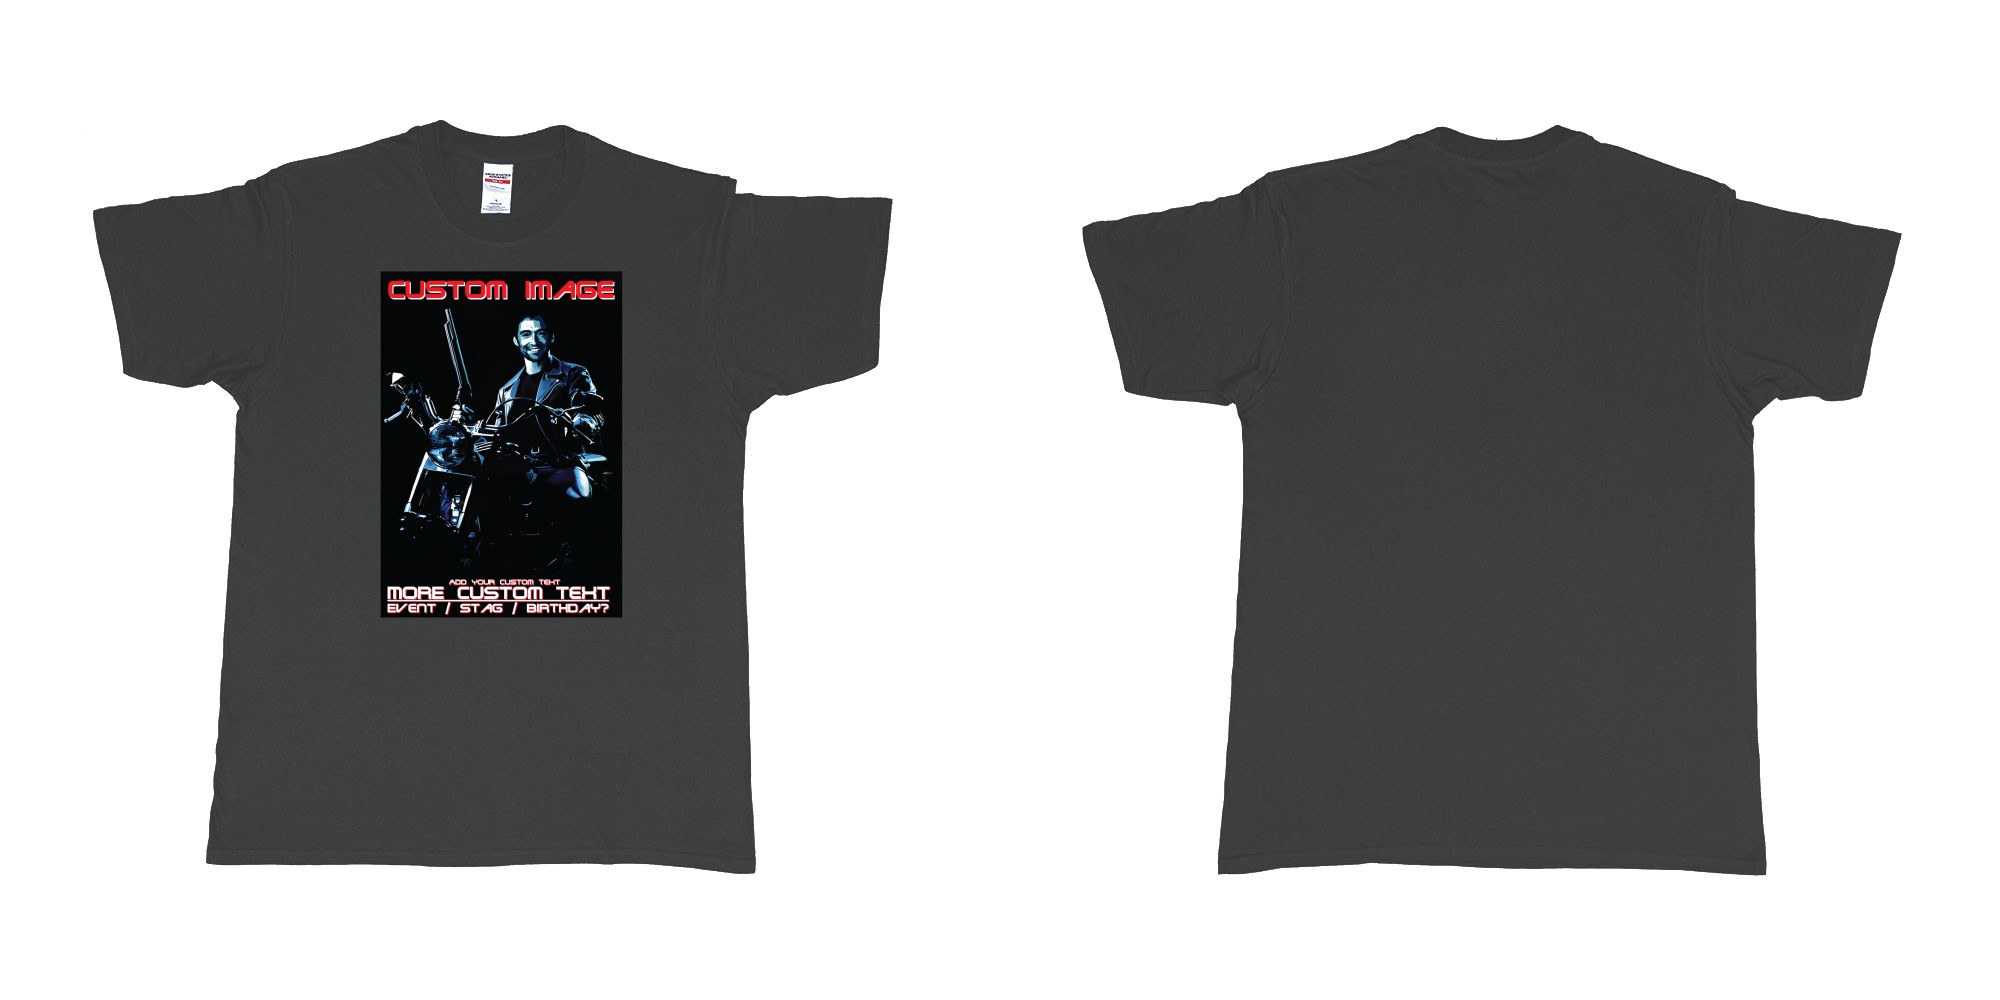 Custom tshirt design terminator 2 judgement day hugh jackman custom face in fabric color black choice your own text made in Bali by The Pirate Way